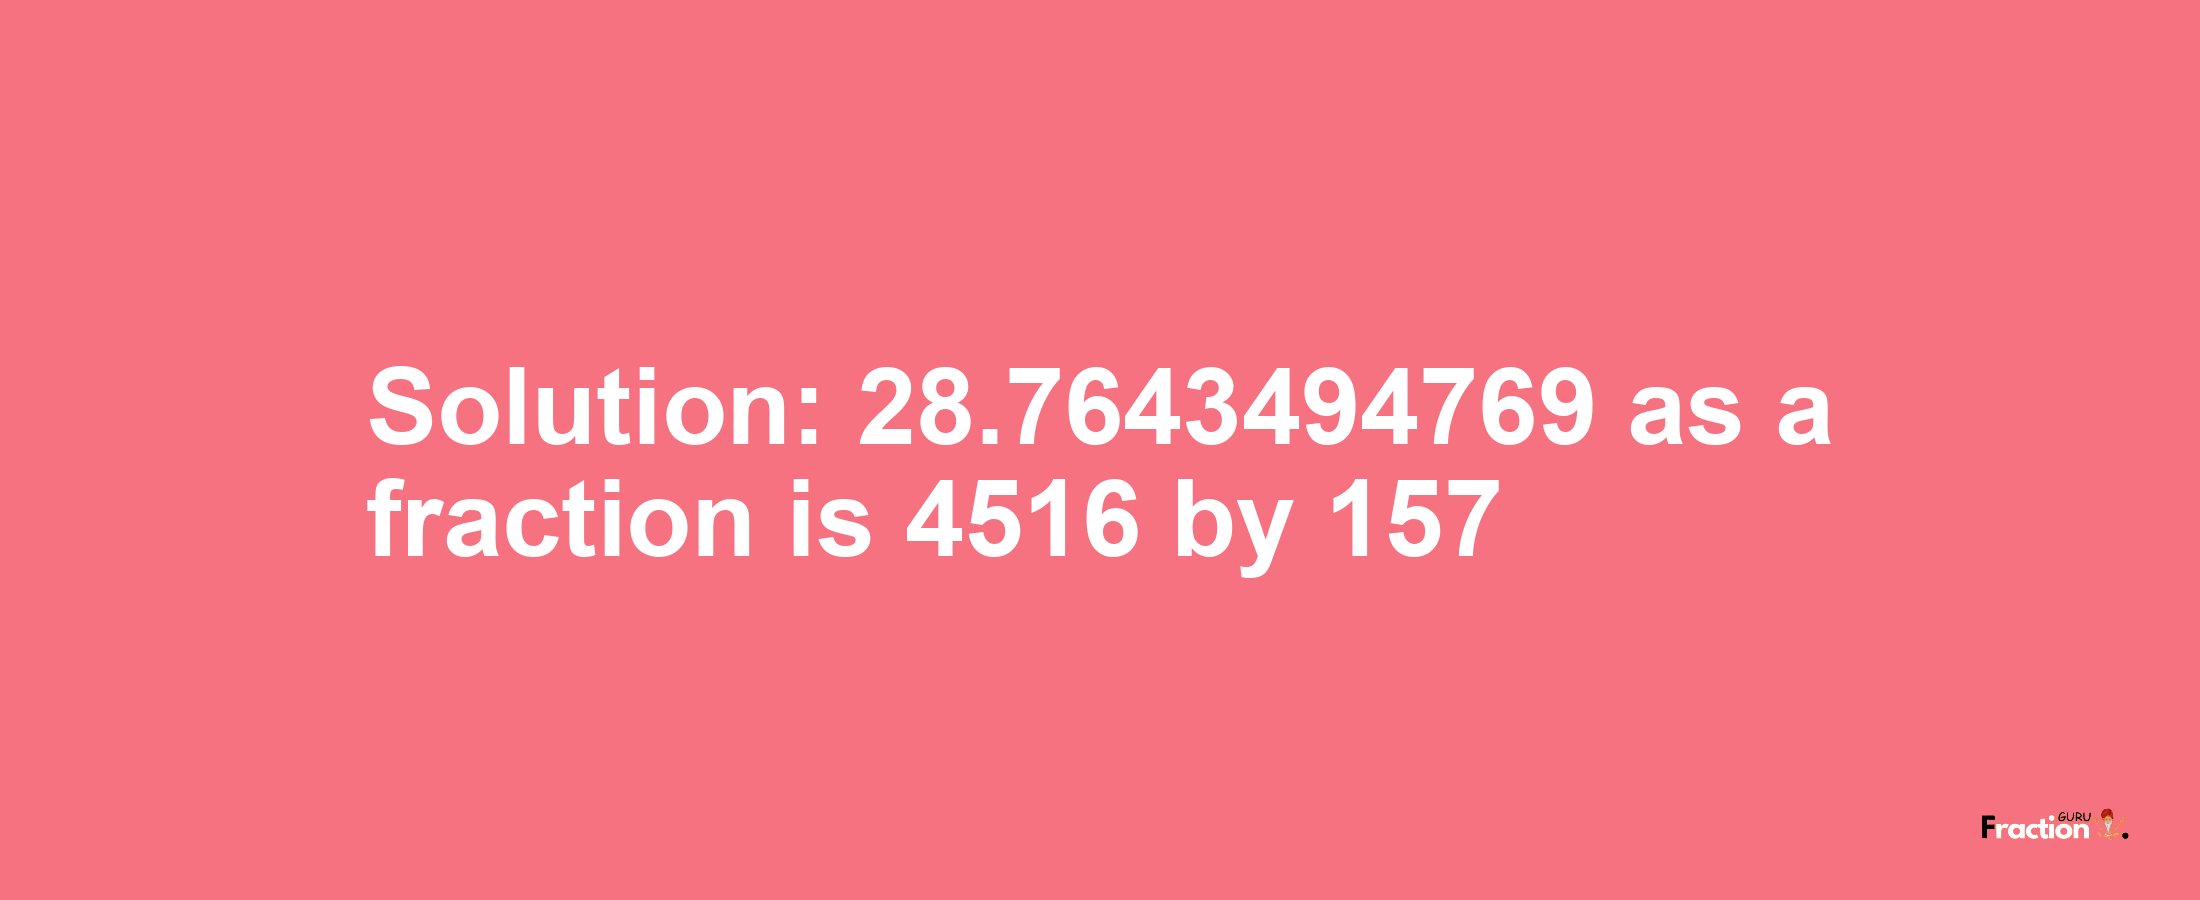 Solution:28.7643494769 as a fraction is 4516/157